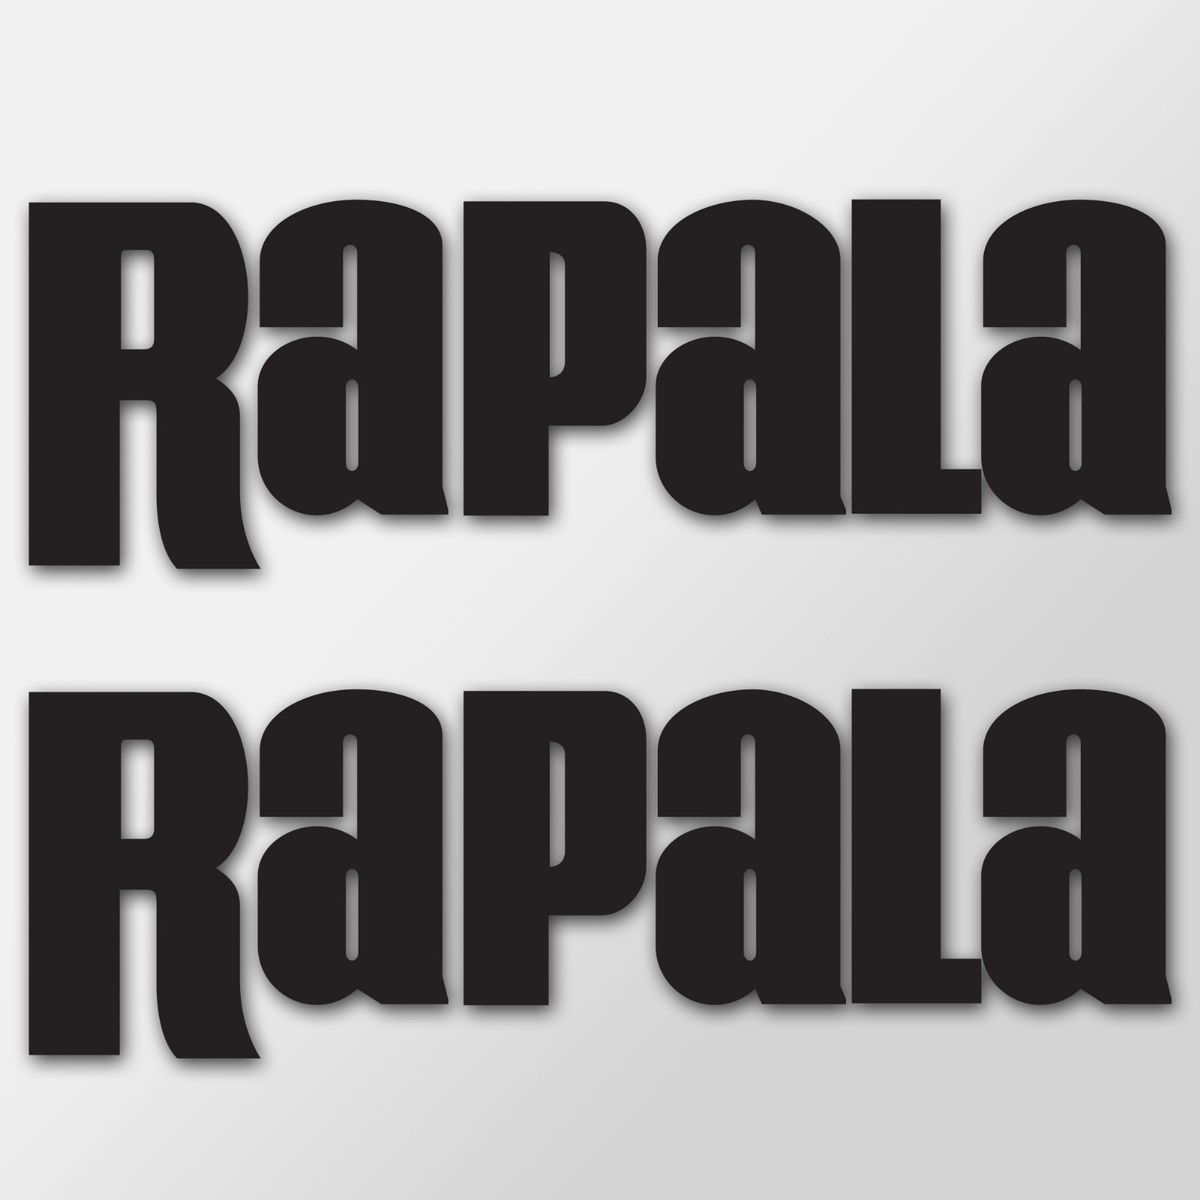 Rapala Fishing Boat Decals Vinyl Stickers Set of 2 New